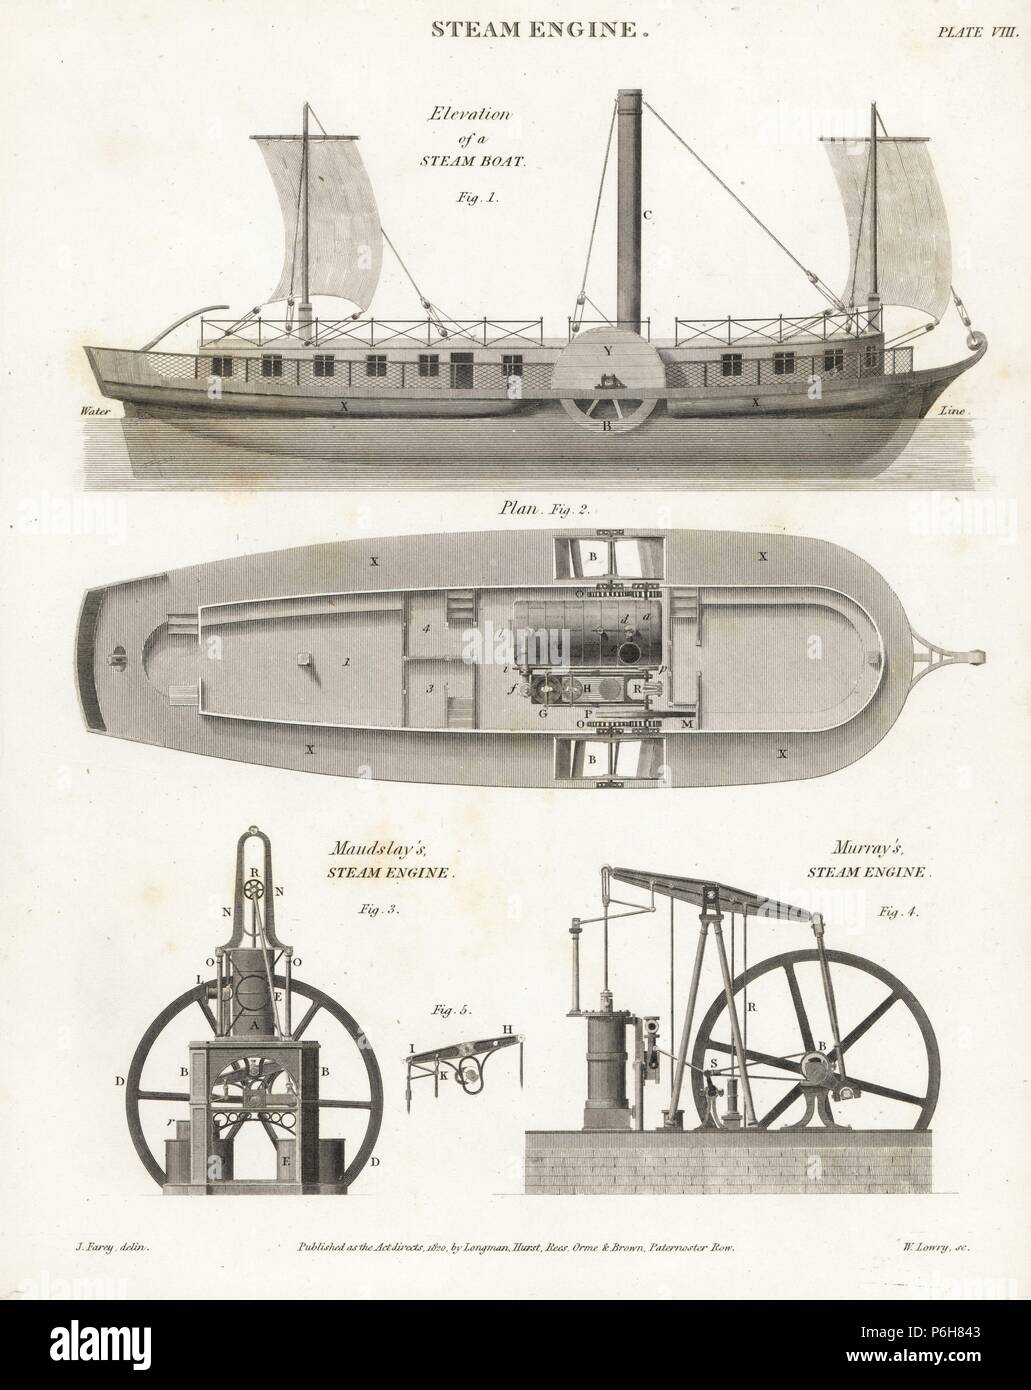 Marine steam engines: steam boat, elevation and plan, Henry Maudslay's side-lever steam engine 1815 and Matthew Murray's Trevithick-pattern steam engine 1811. Copperplate engraving by Wilson Lowry after an Illustration by J. Farey from Abraham Rees' 'Cyclopedia or Universal Dictionary,' London, 1820. Stock Photo